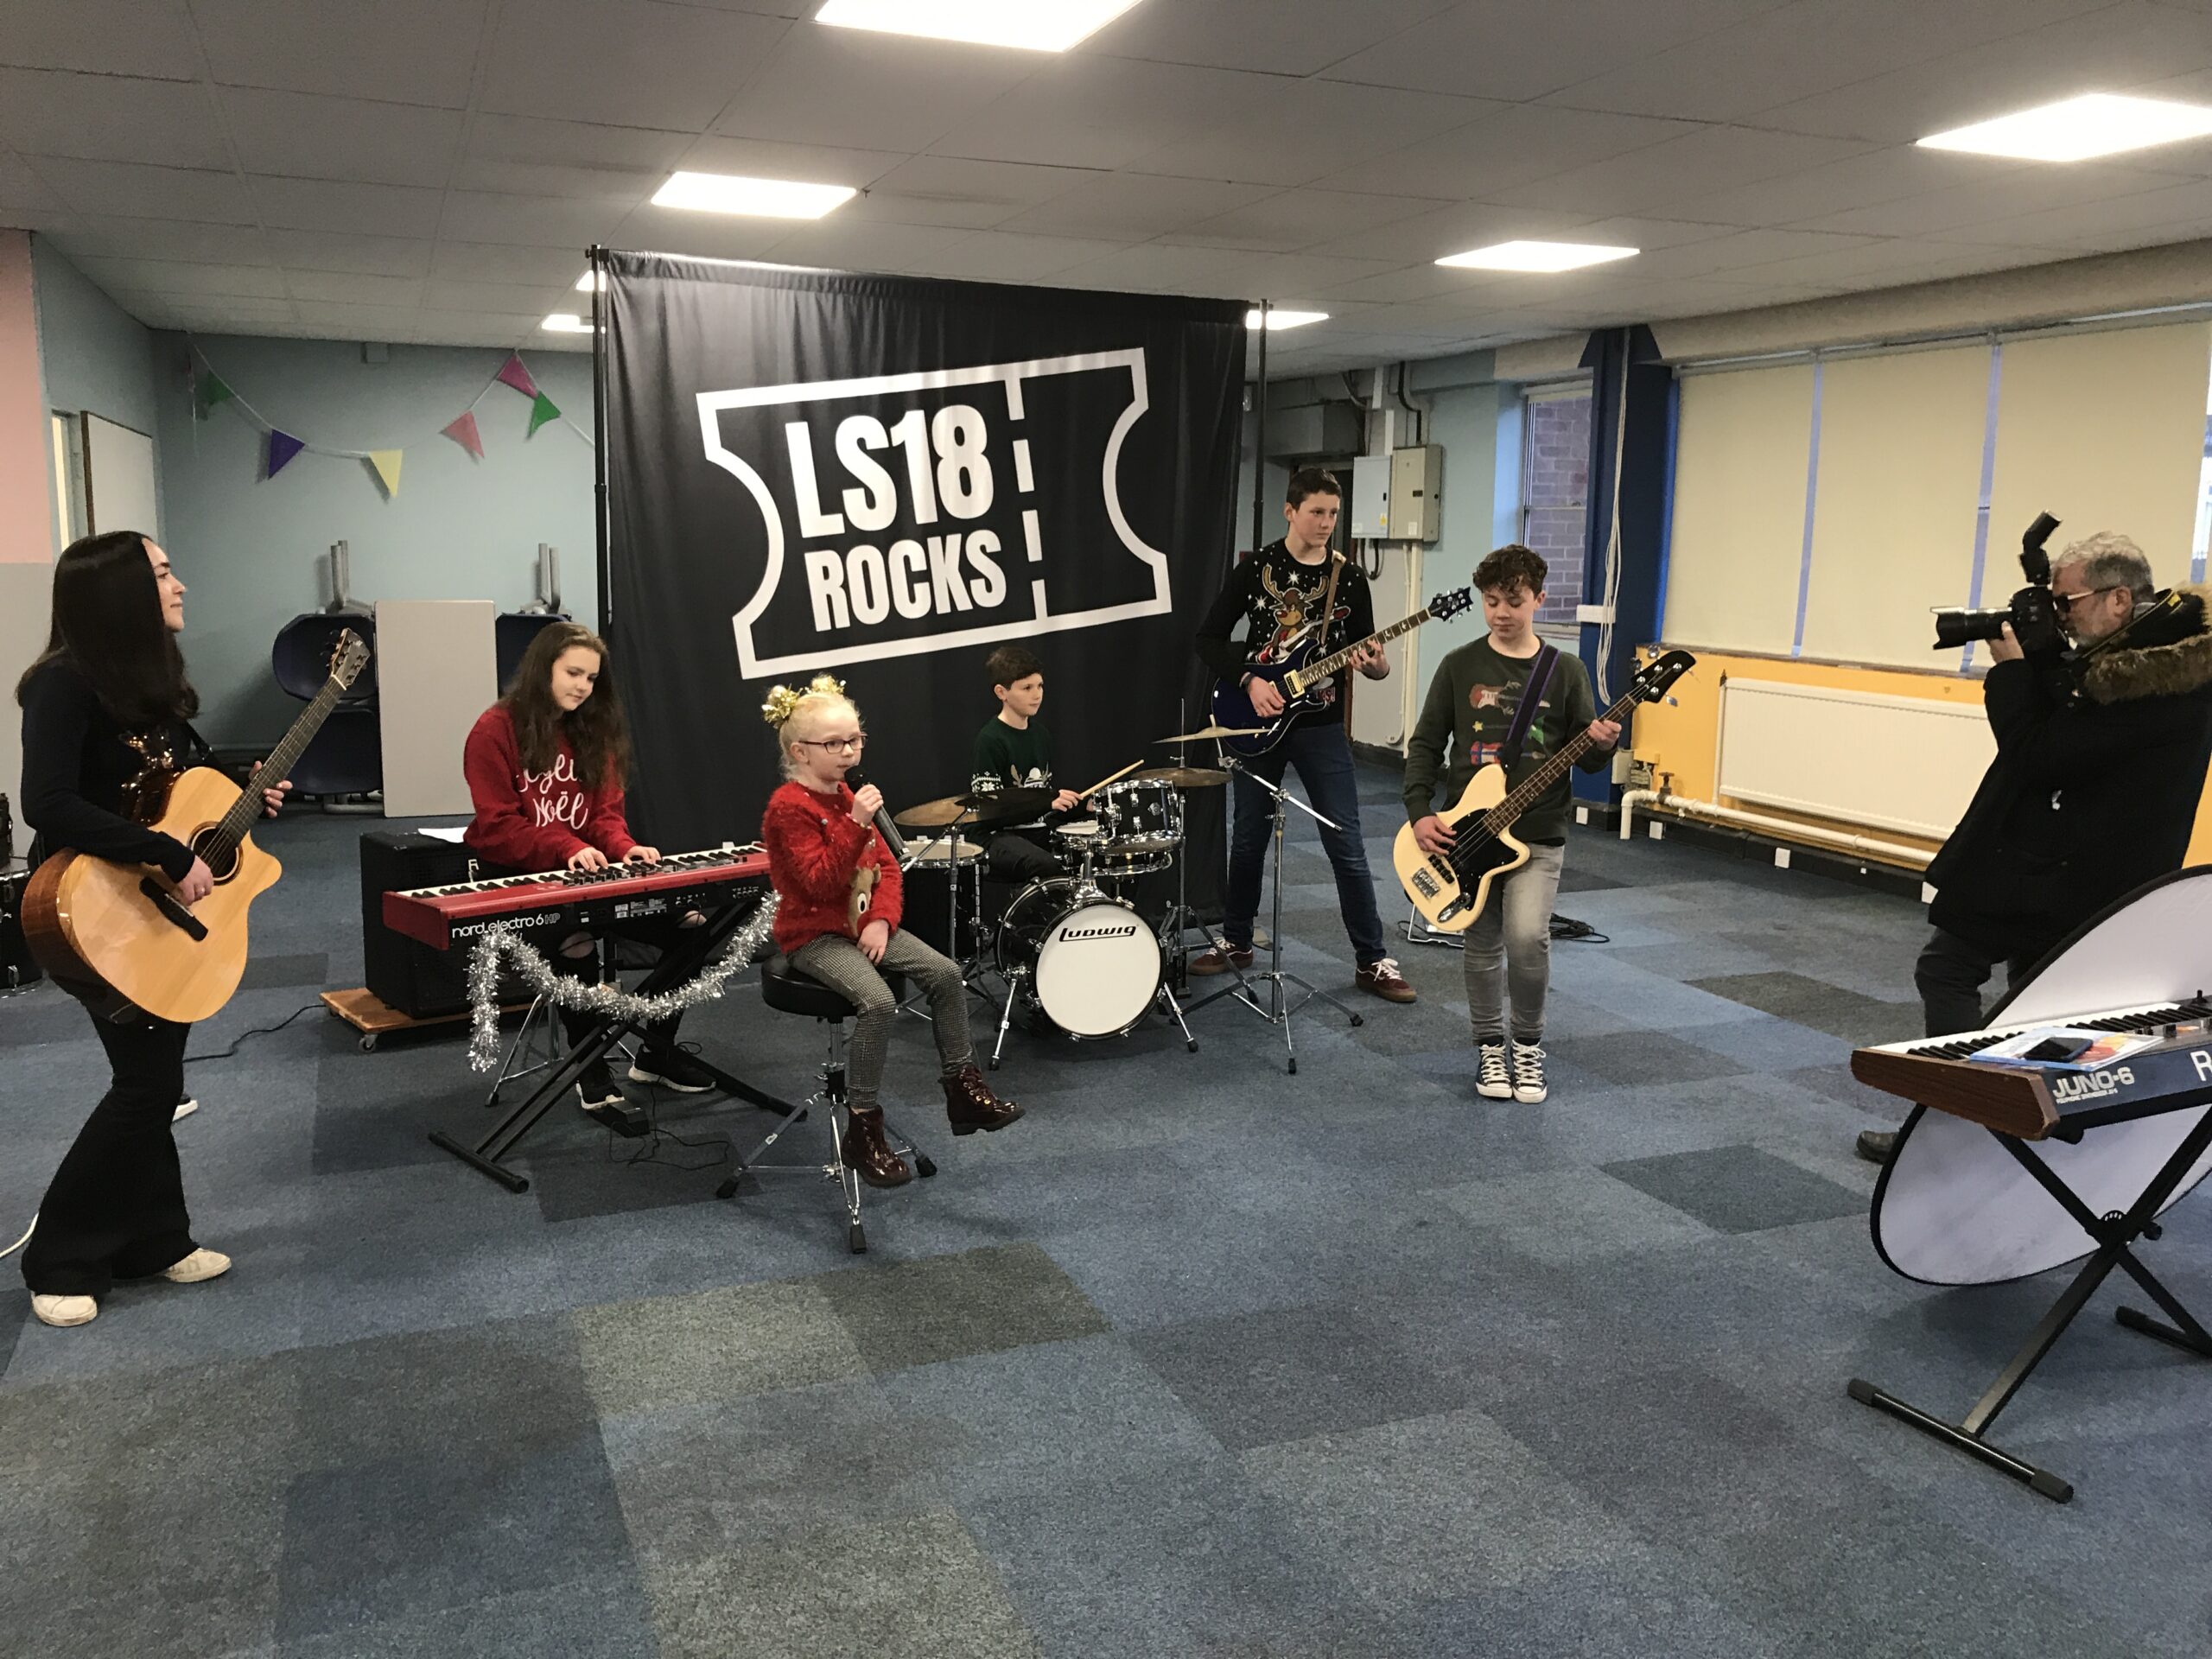 The LS18 Rocks project band playing together: children and young people of various ages playing guitar, piano and drums with a singer.